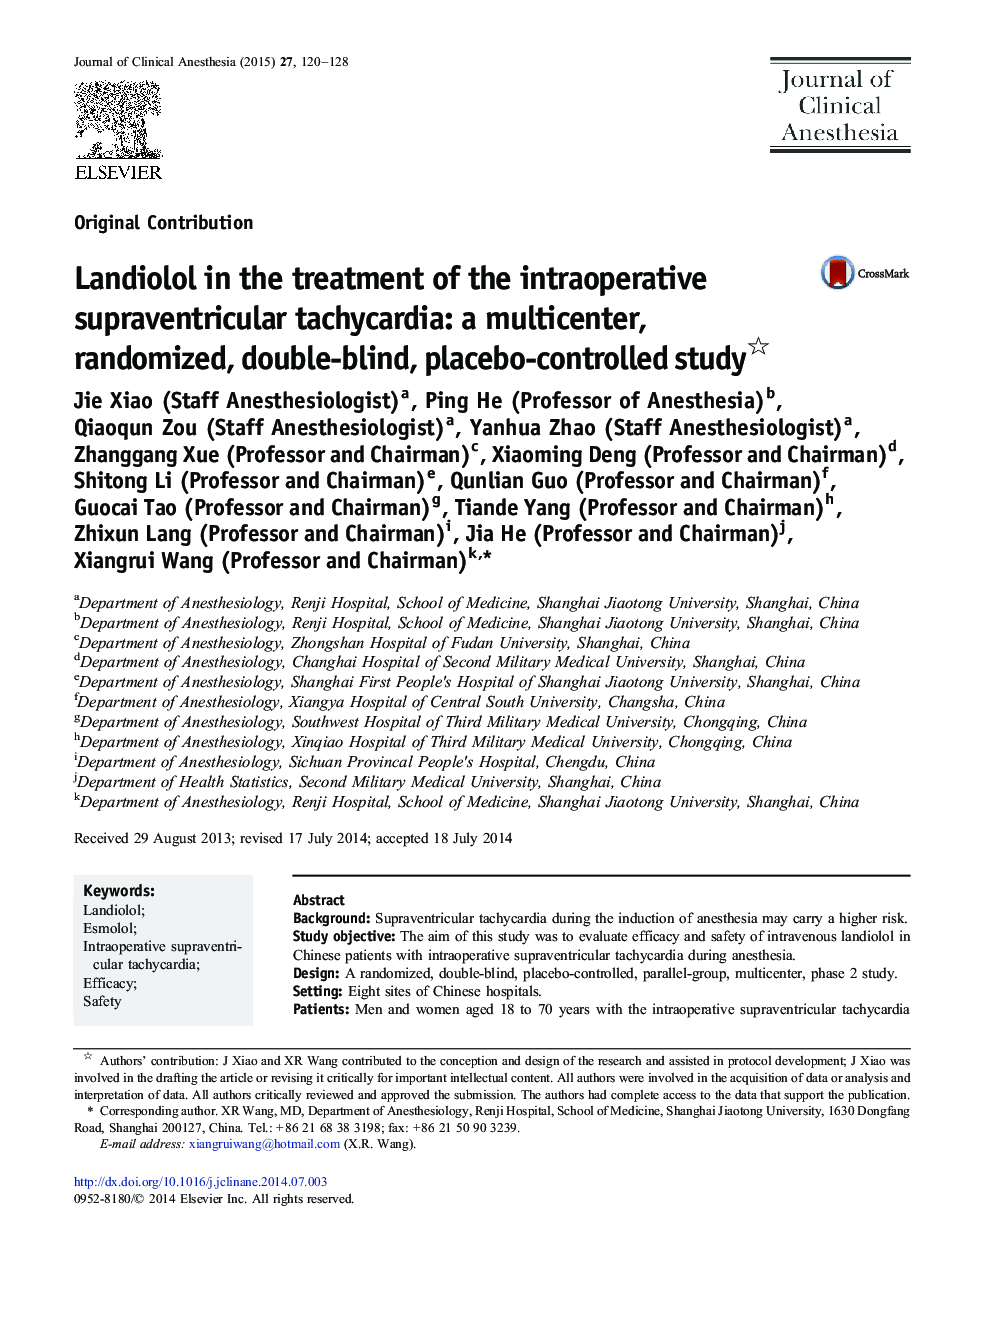 Landiolol in the treatment of the intraoperative supraventricular tachycardia: a multicenter, randomized, double-blind, placebo-controlled study 